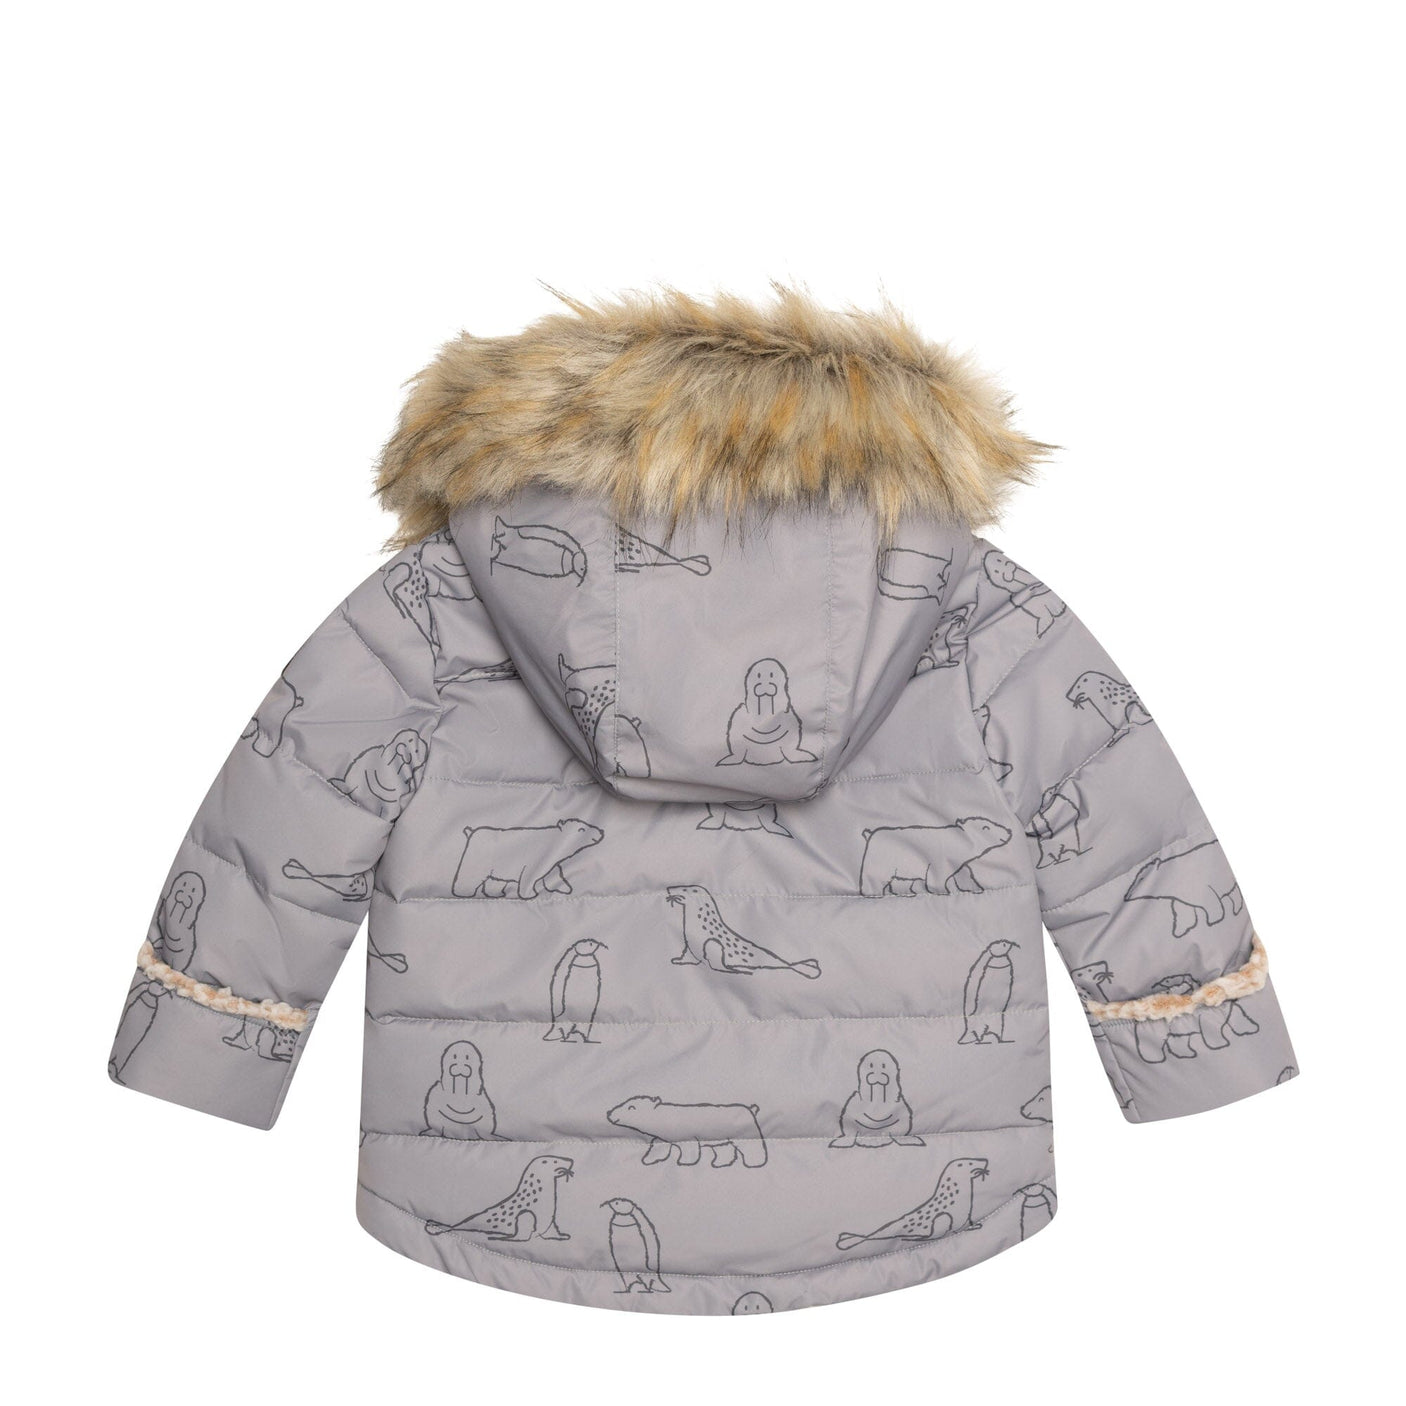 Two Piece Baby Snowsuit Grey With Arctic Friends Print-4